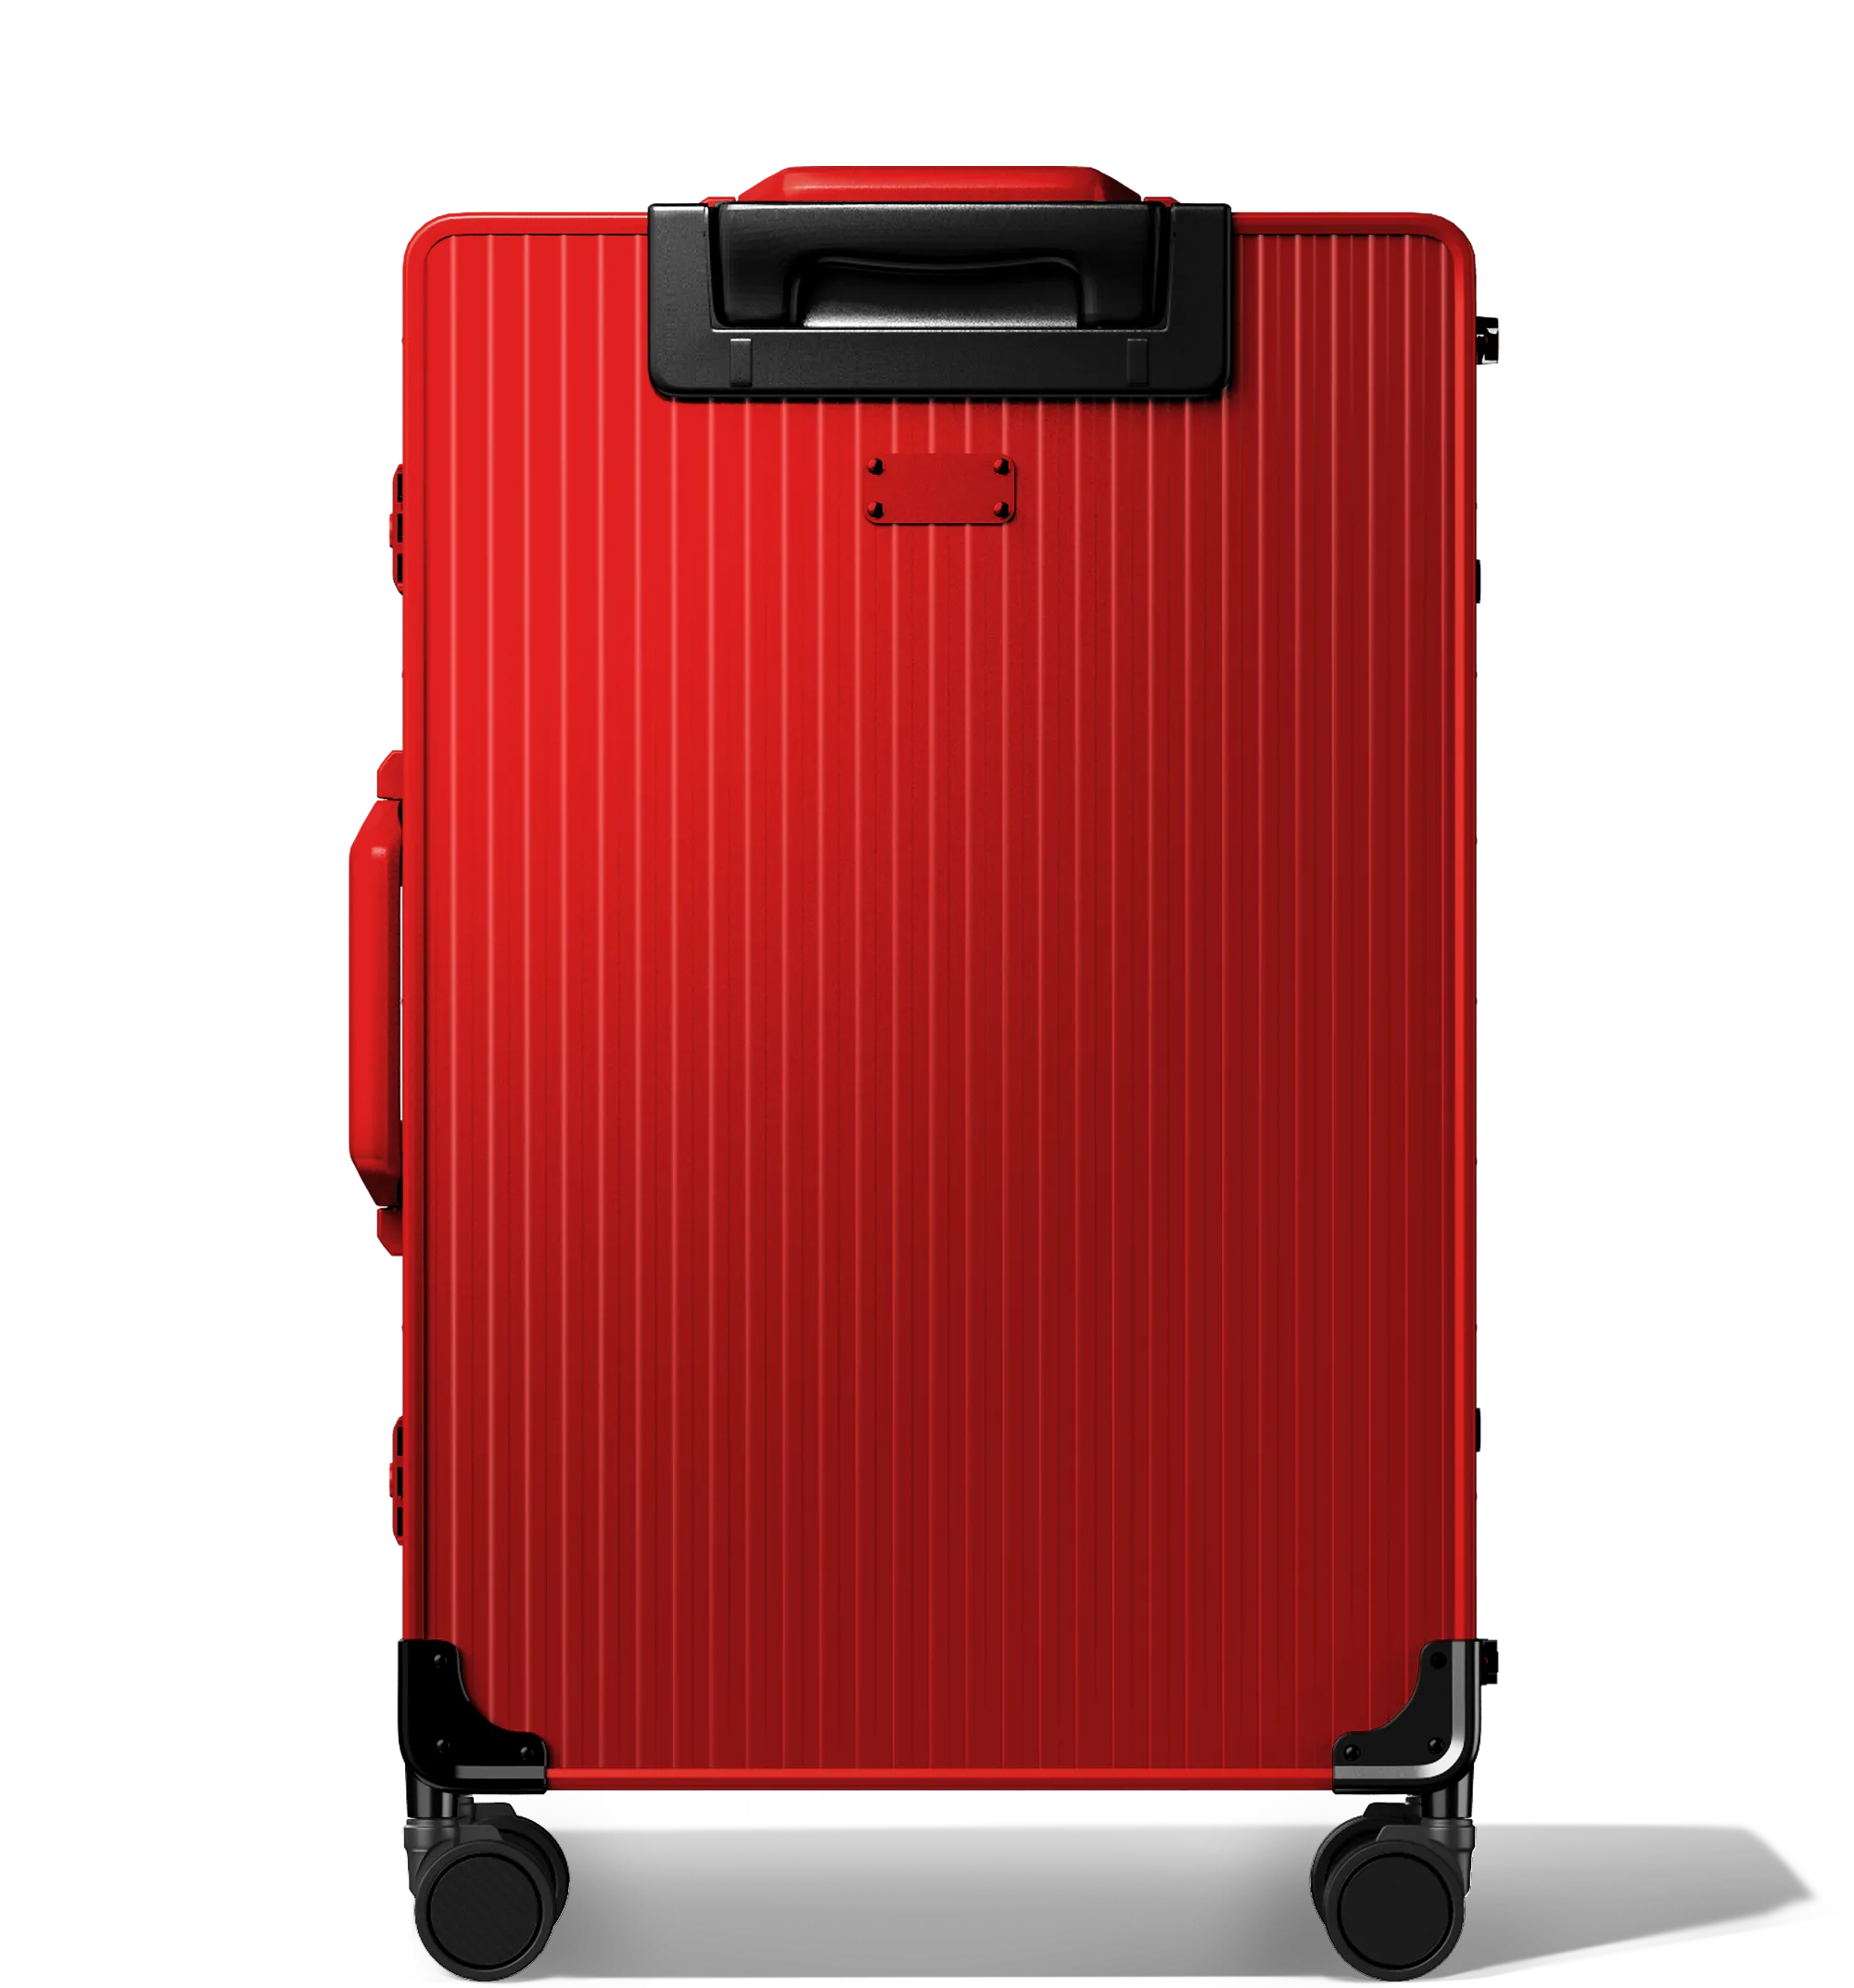 Frontal view of a Red Check-In 65/25 , vertical hard-shell aluminium Luggage with ribbed texture, featuring a top handle, side latches, and four multi-directional spinner wheels, against a white background.